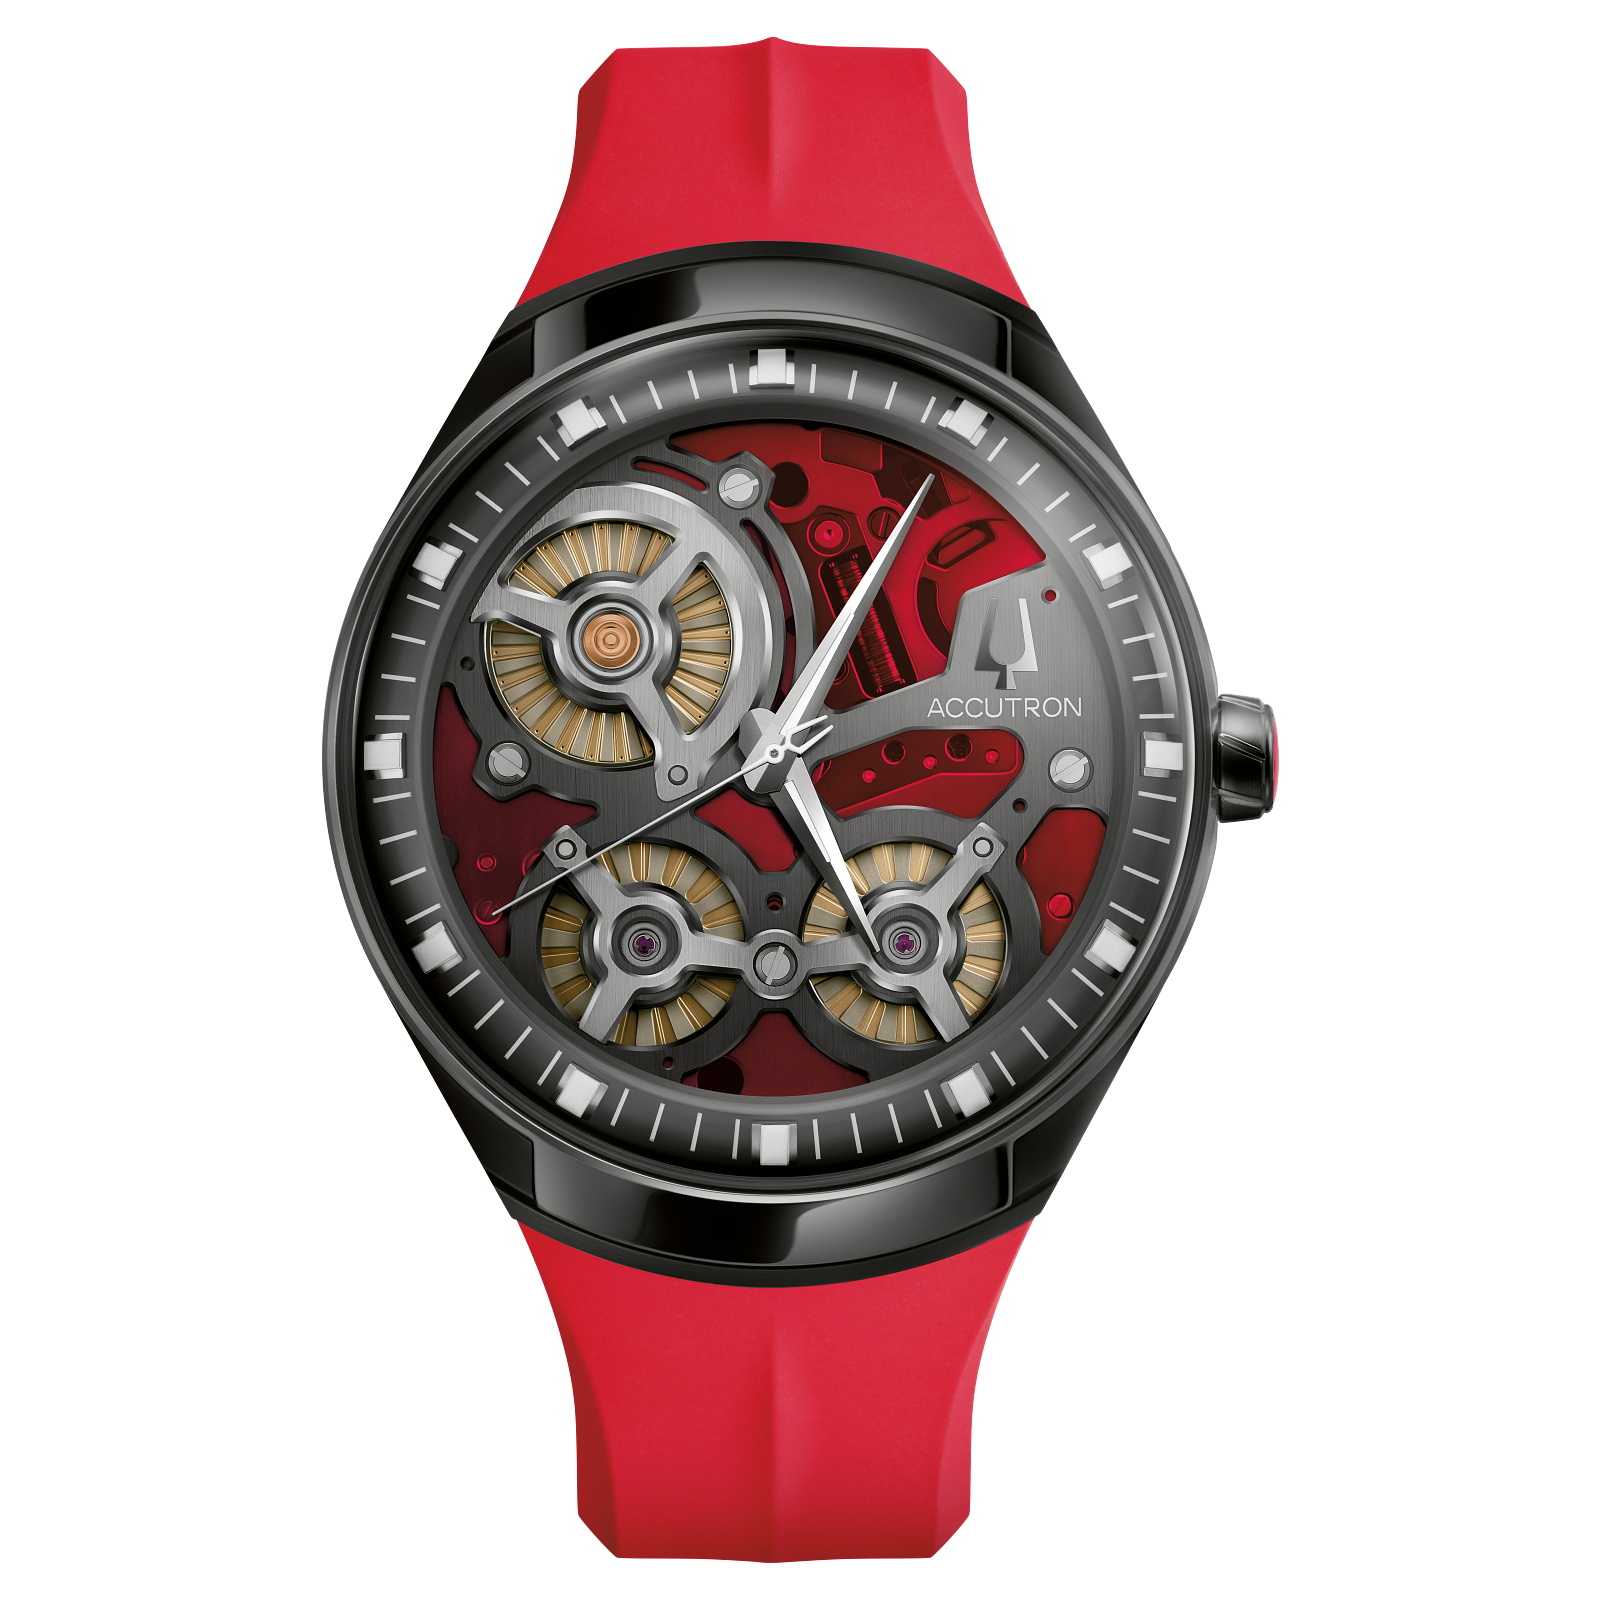 Accutron 28A206 DNA Casino Electrostatic Las Vegas Red Limited Edition